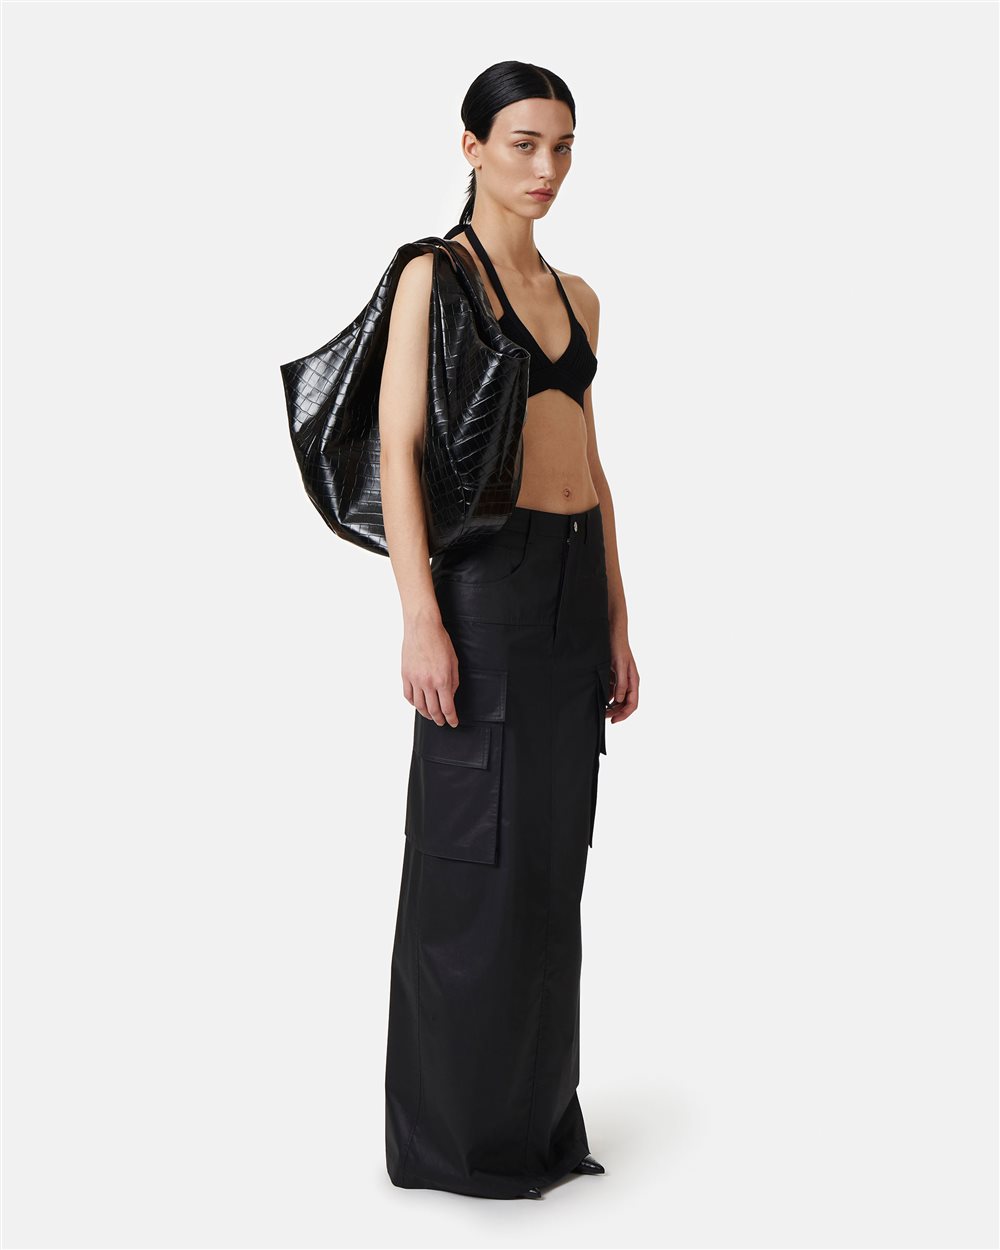 Long skirt with large cargo pockets - Iceberg - Official Website